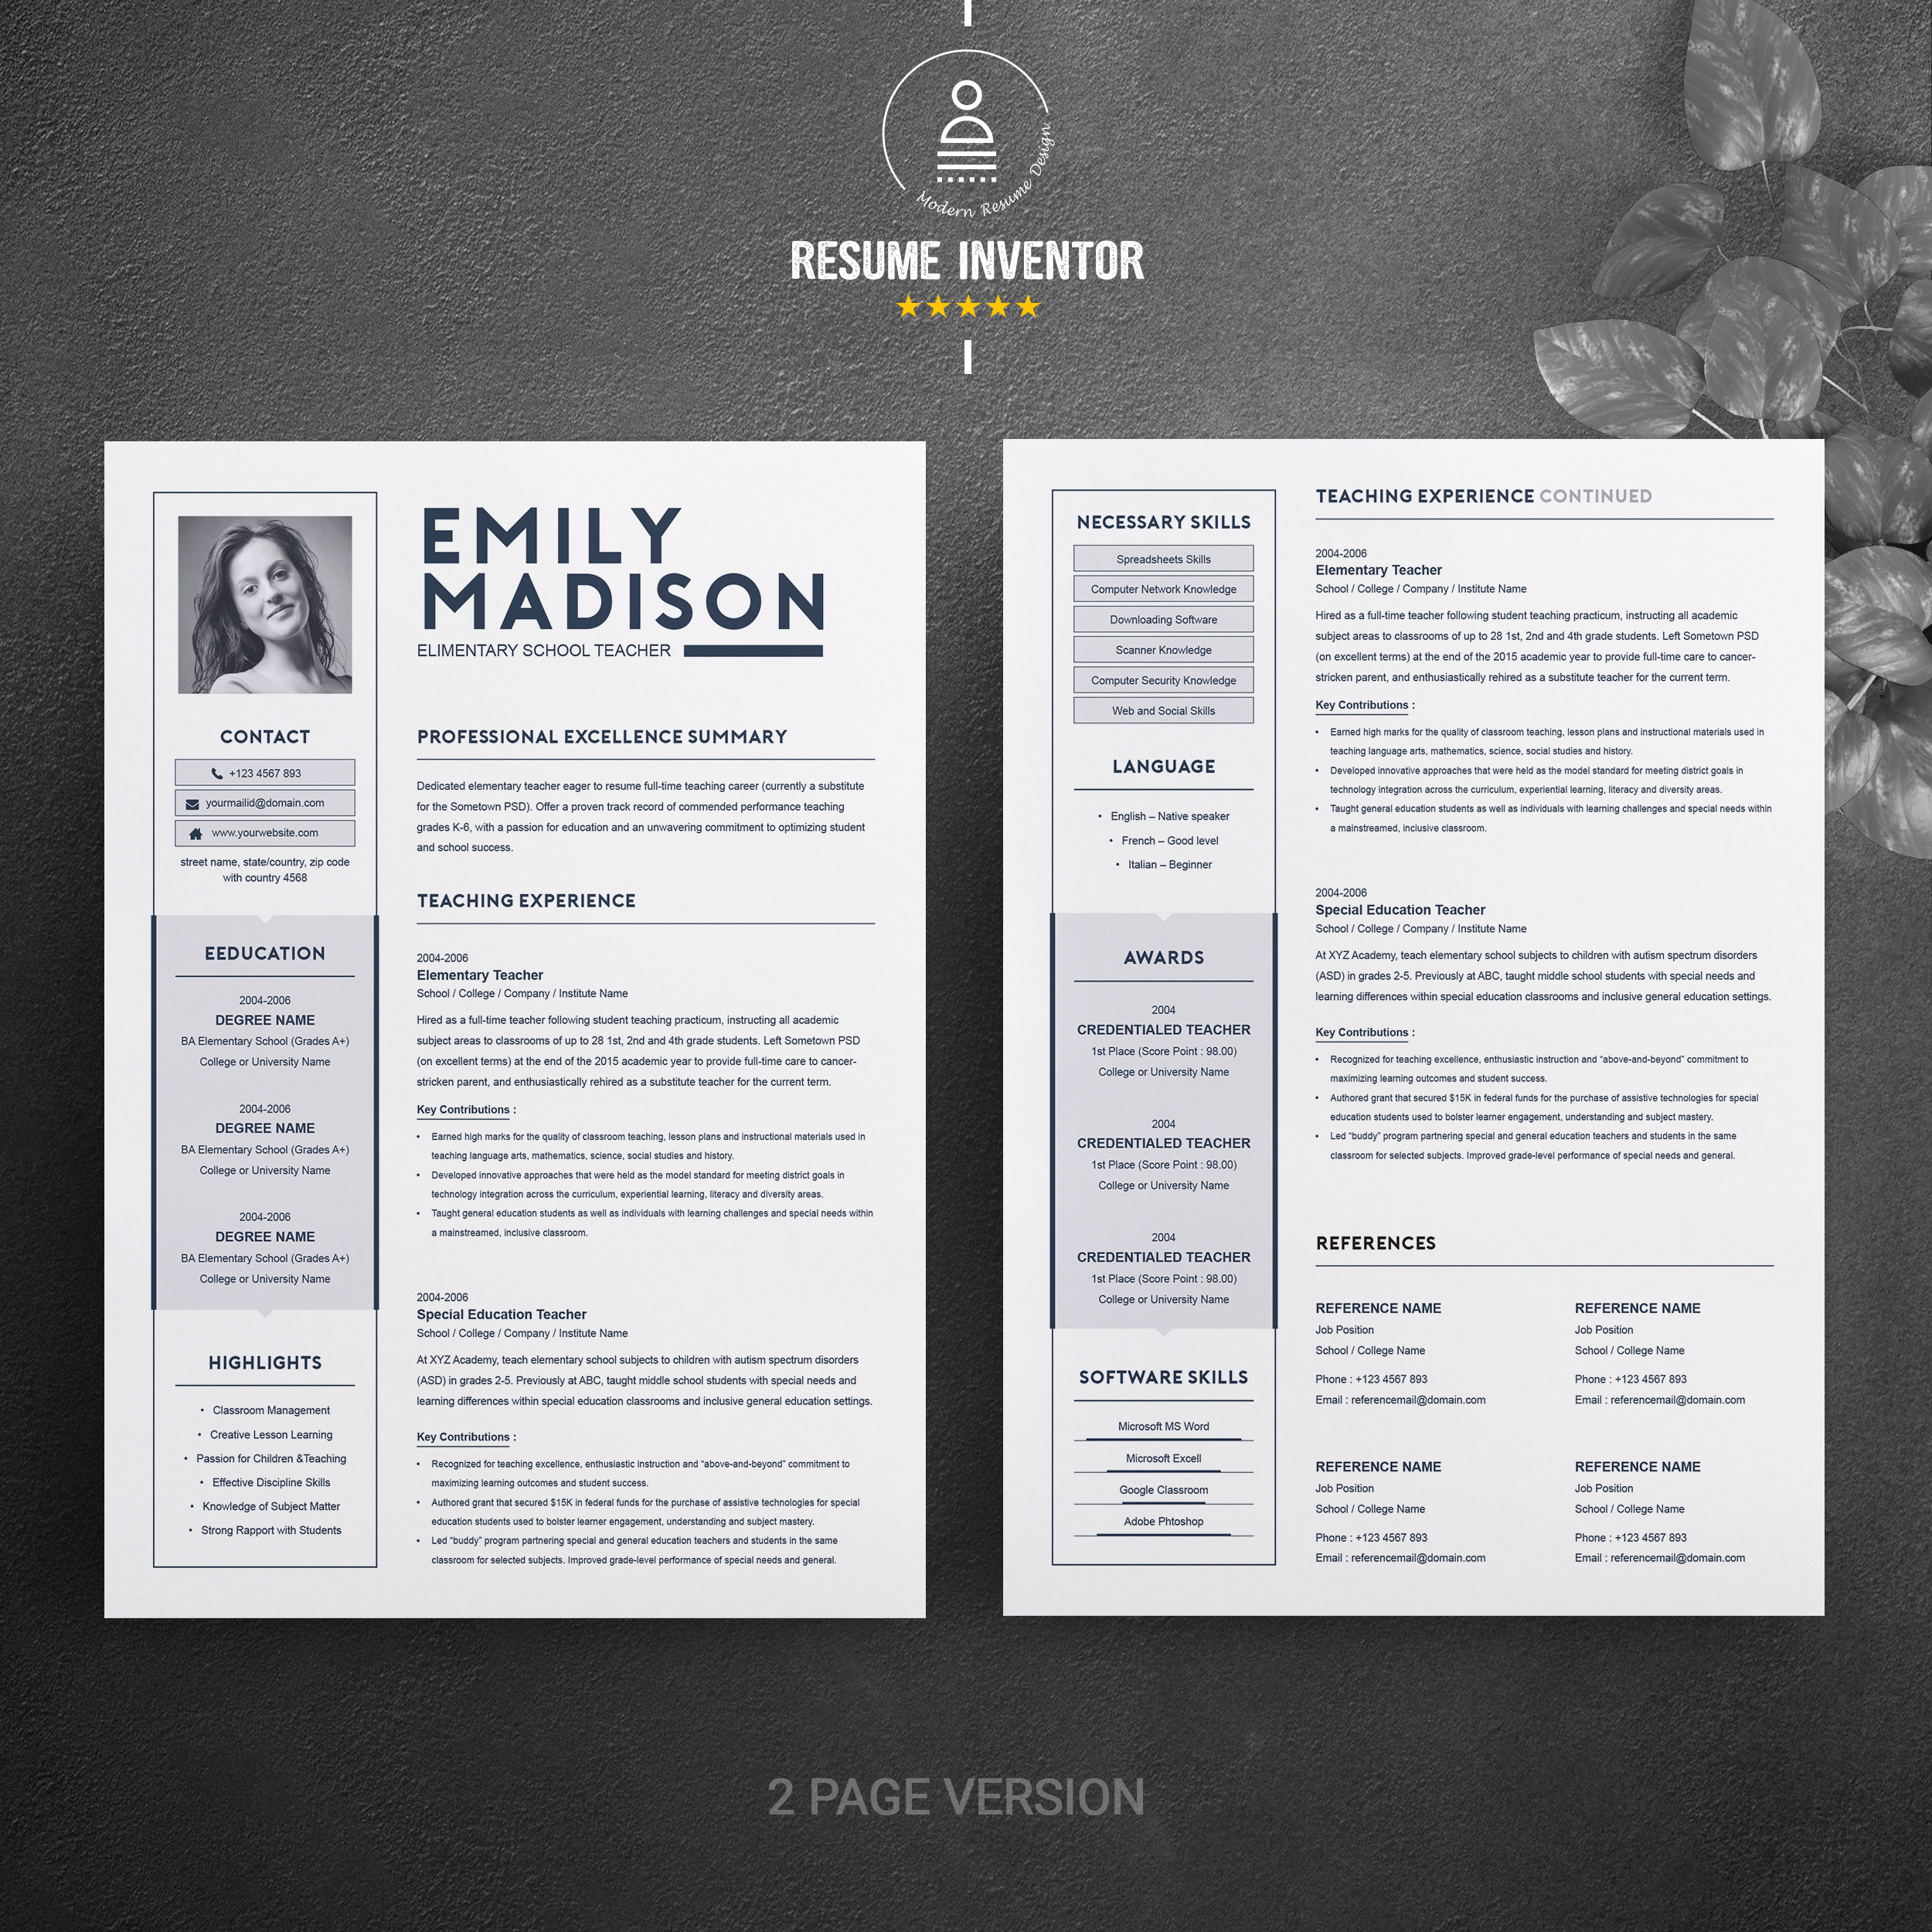 Free Resume Template for Elementary School Teacher Teacher Resume Template for Ms Word – Graphicfy